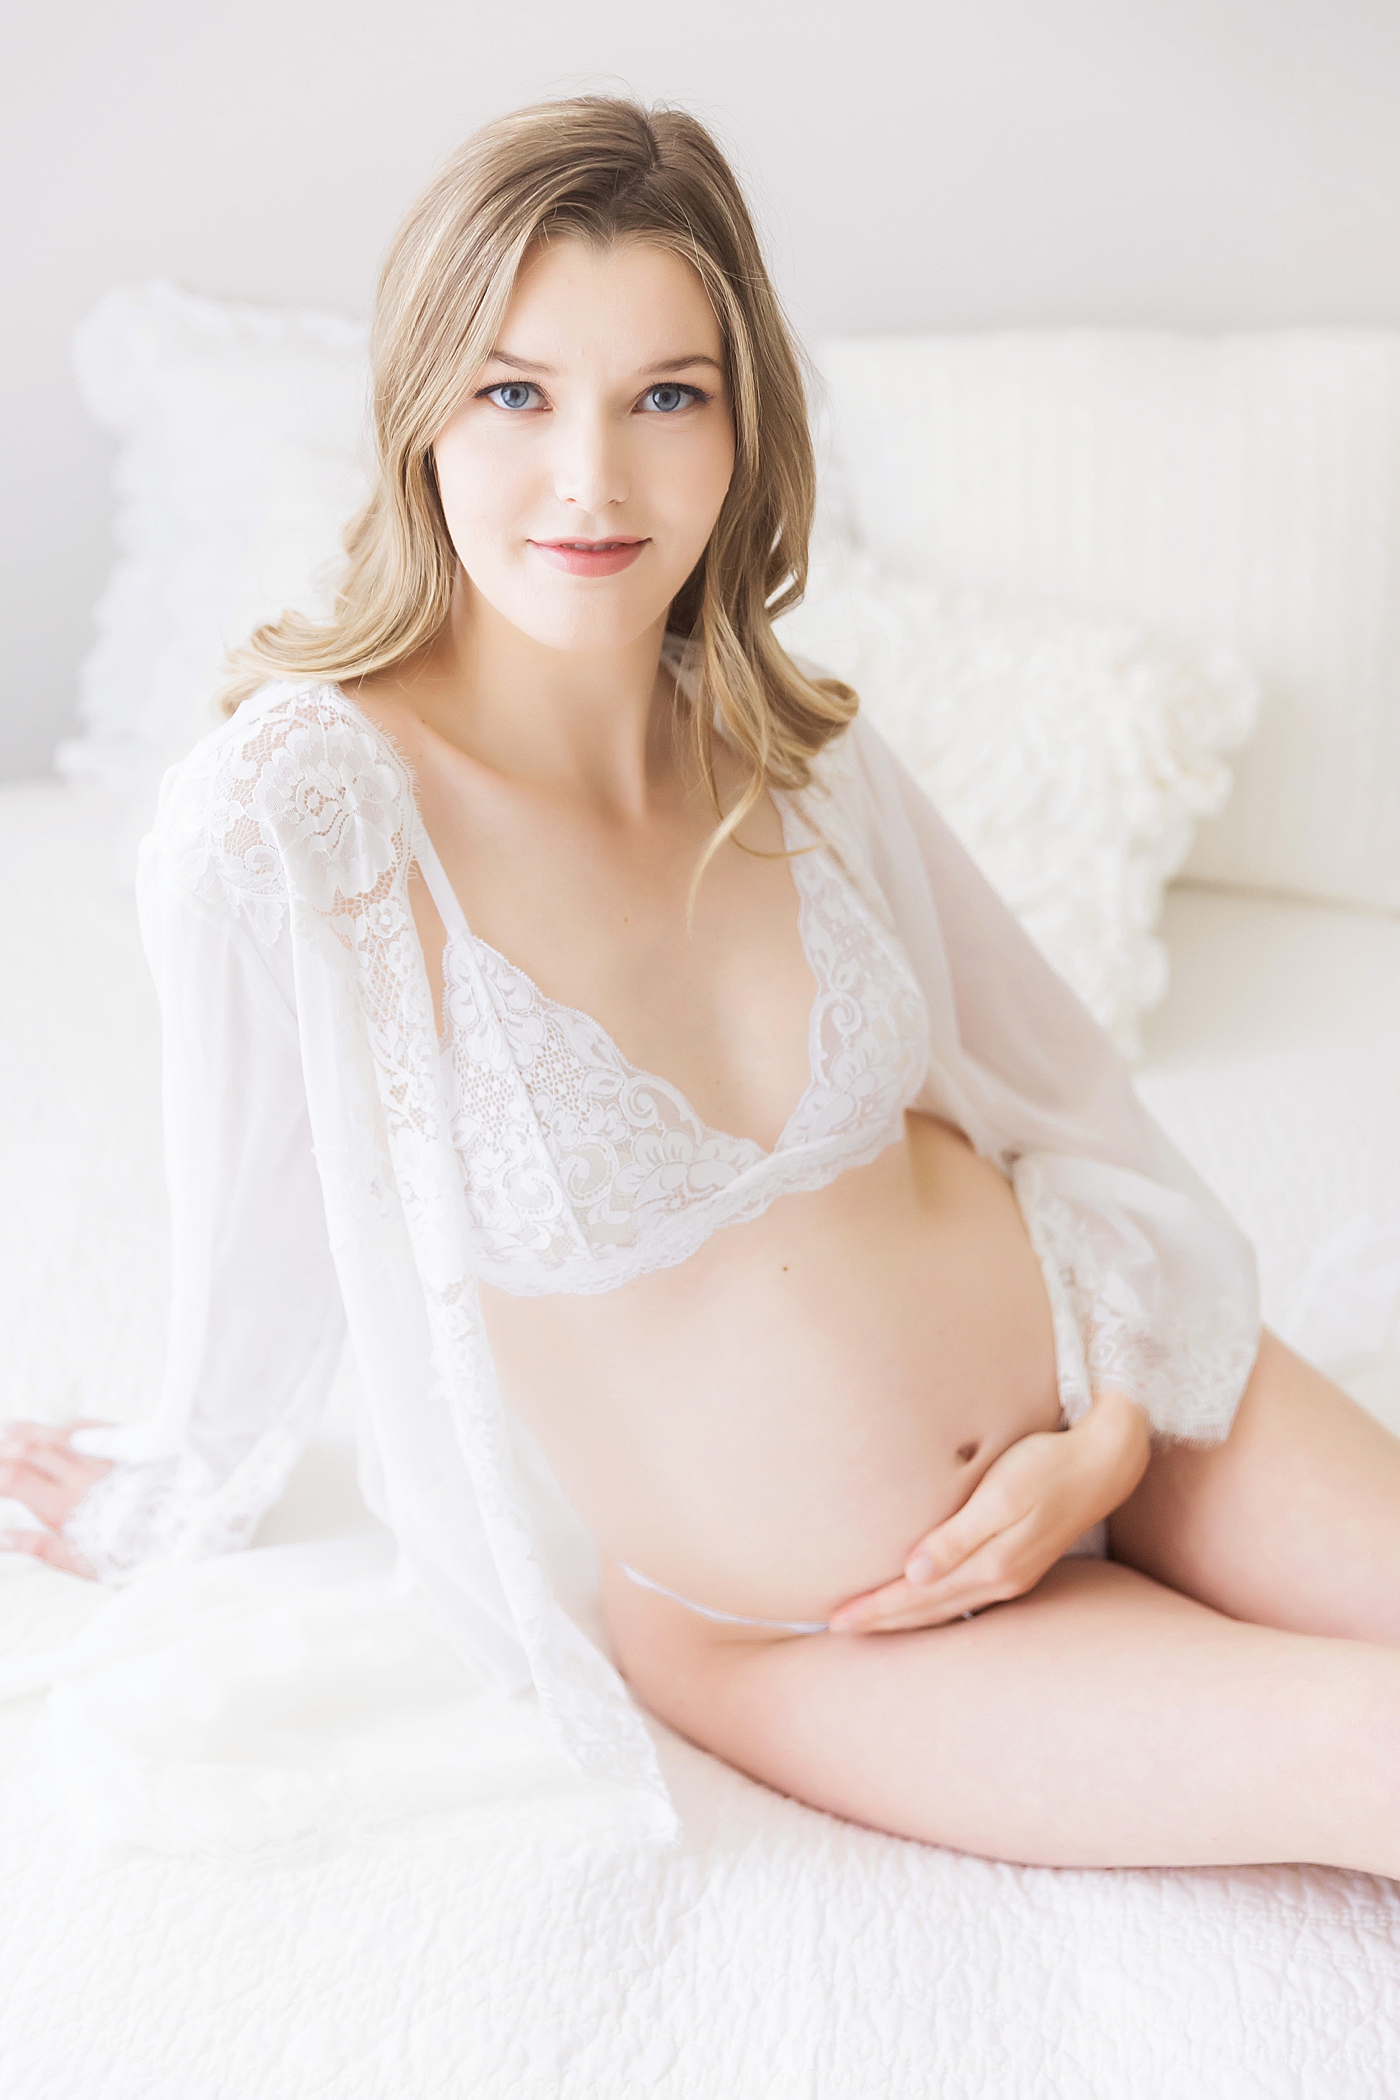 Expecting mom in white lace robe and undergarments for maternity photos. Photo by Fresh Light Photography.